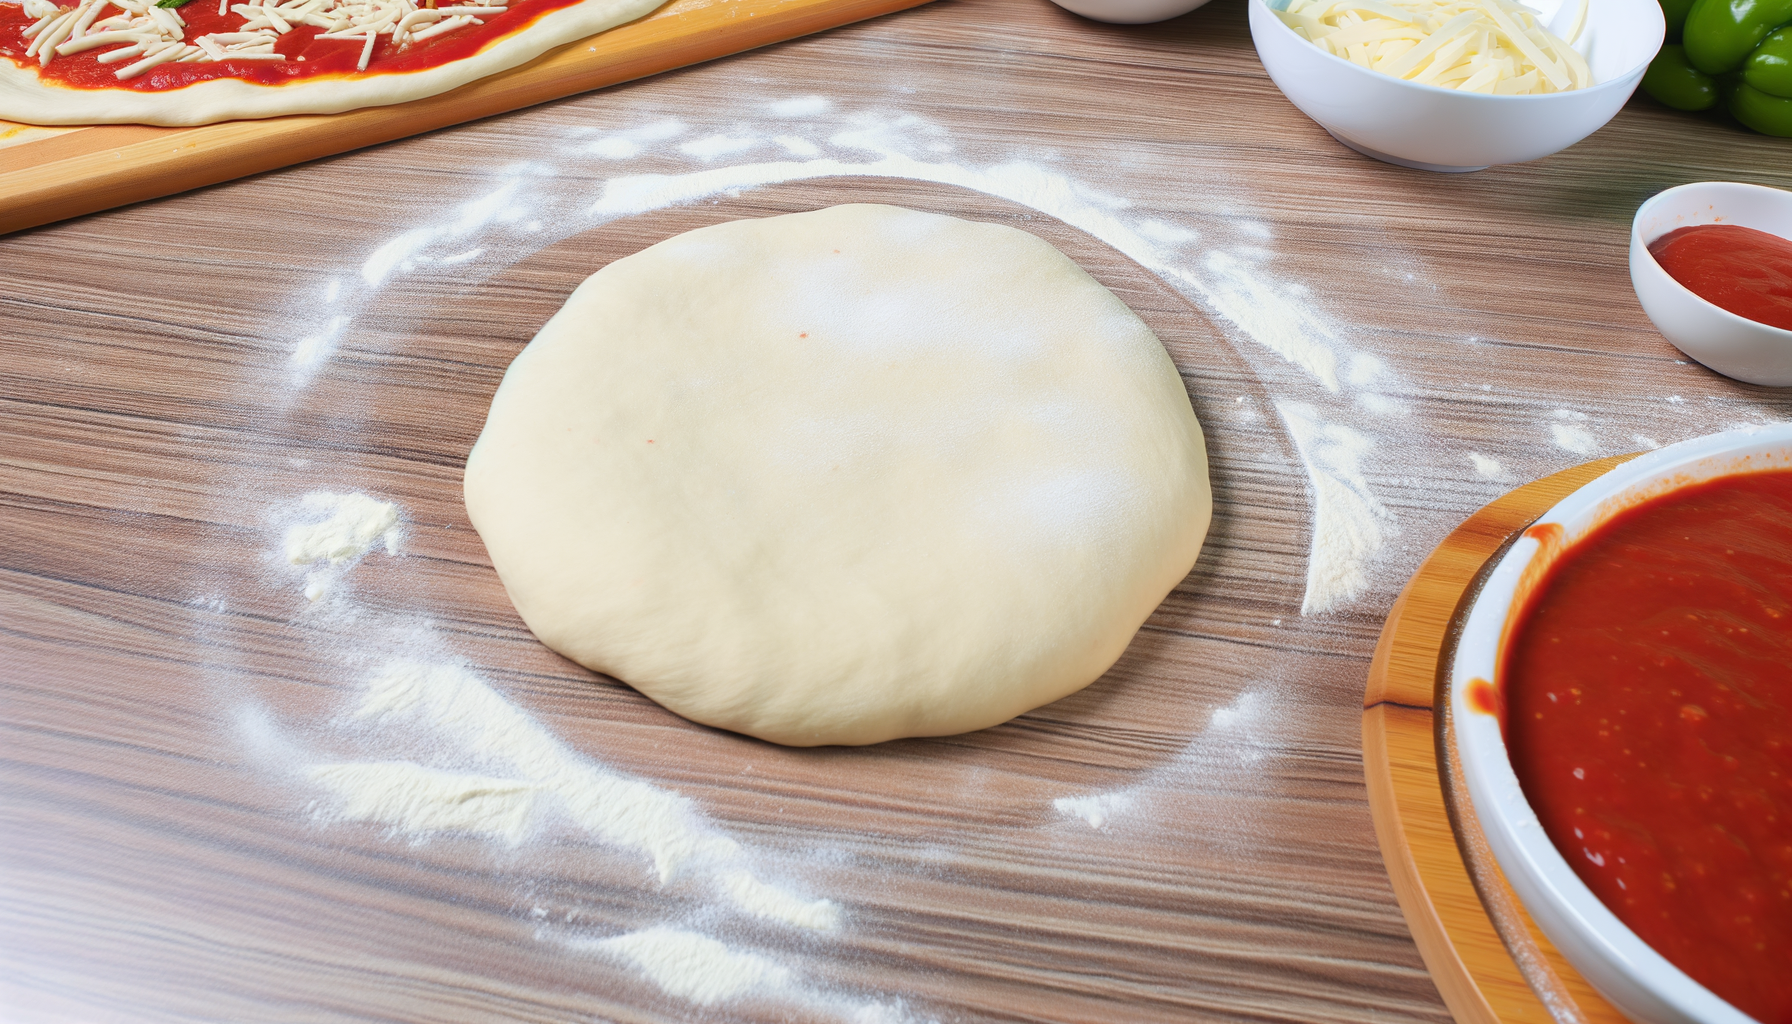 Handmade thin-crust pizza dough on a wooden counter with flour, marinara sauce, cheese, and toppings around.